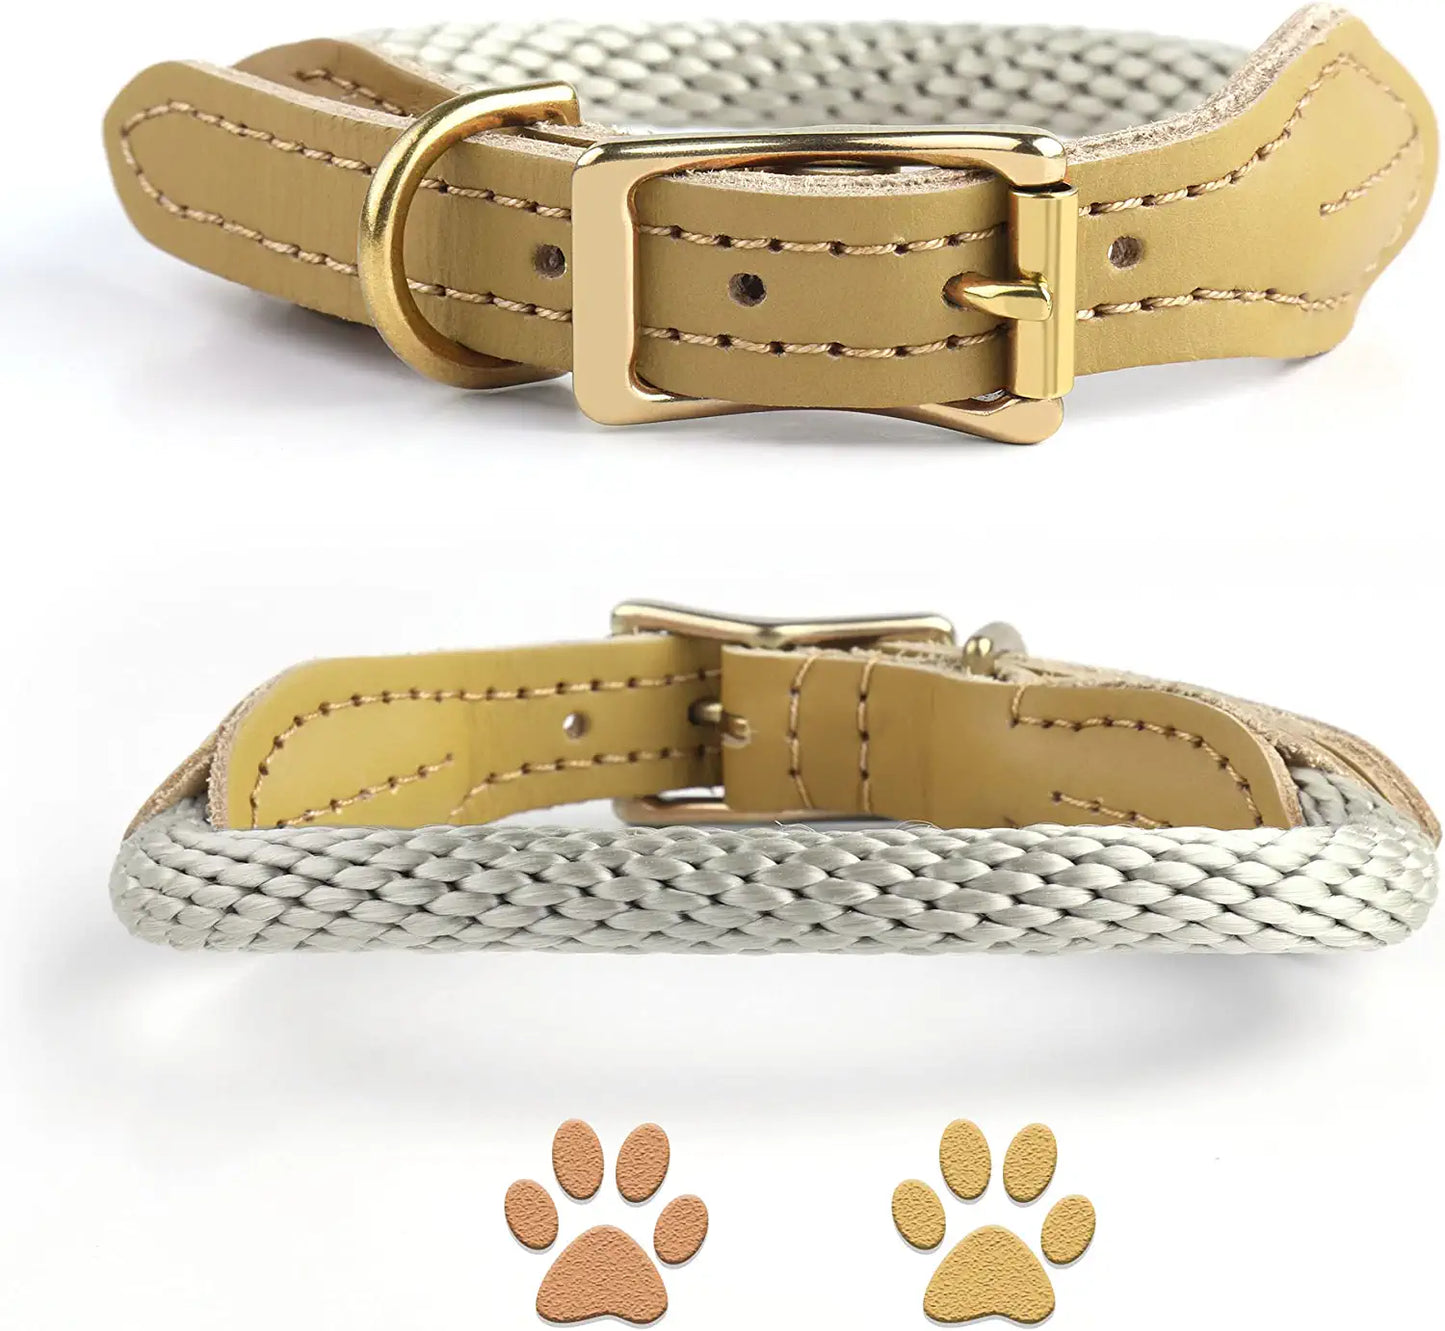 Decorbea Airtag Holder- Airtag Dog Collar Holder(2 Pack)- Dog Airtag Holder in Fashionable Design -PU Leather Pet Collar Case for Apple Airtags Electronics > GPS Accessories > GPS Cases Decorbea Khaki Dog Collars (Pack of 1) Collar(S/M):11.8"-14.2" 